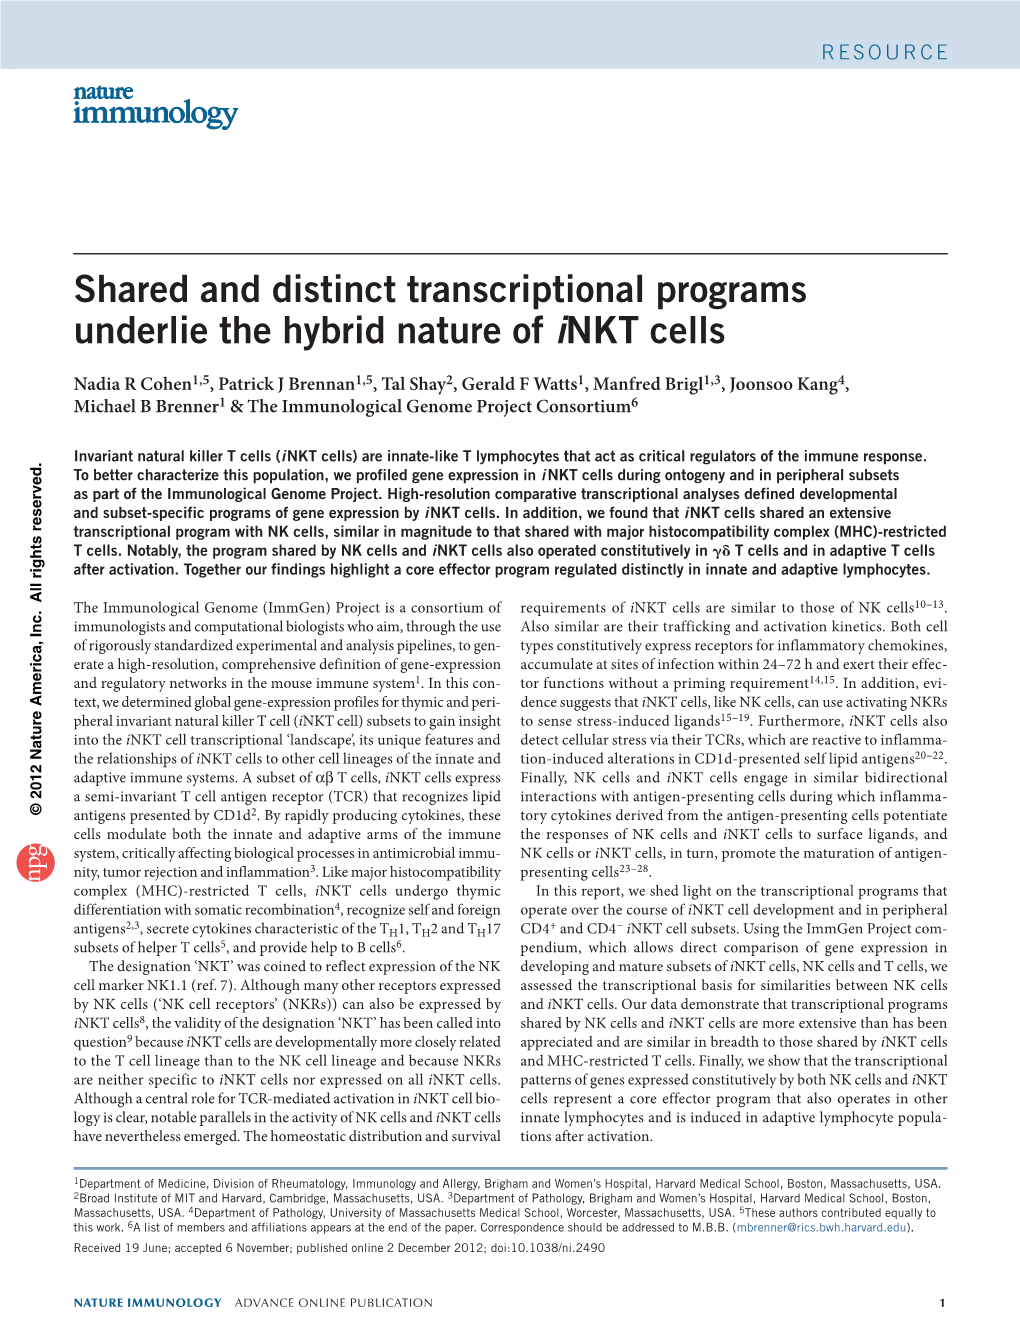 Shared and Distinct Transcriptional Programs Underlie the Hybrid Nature of Inkt Cells